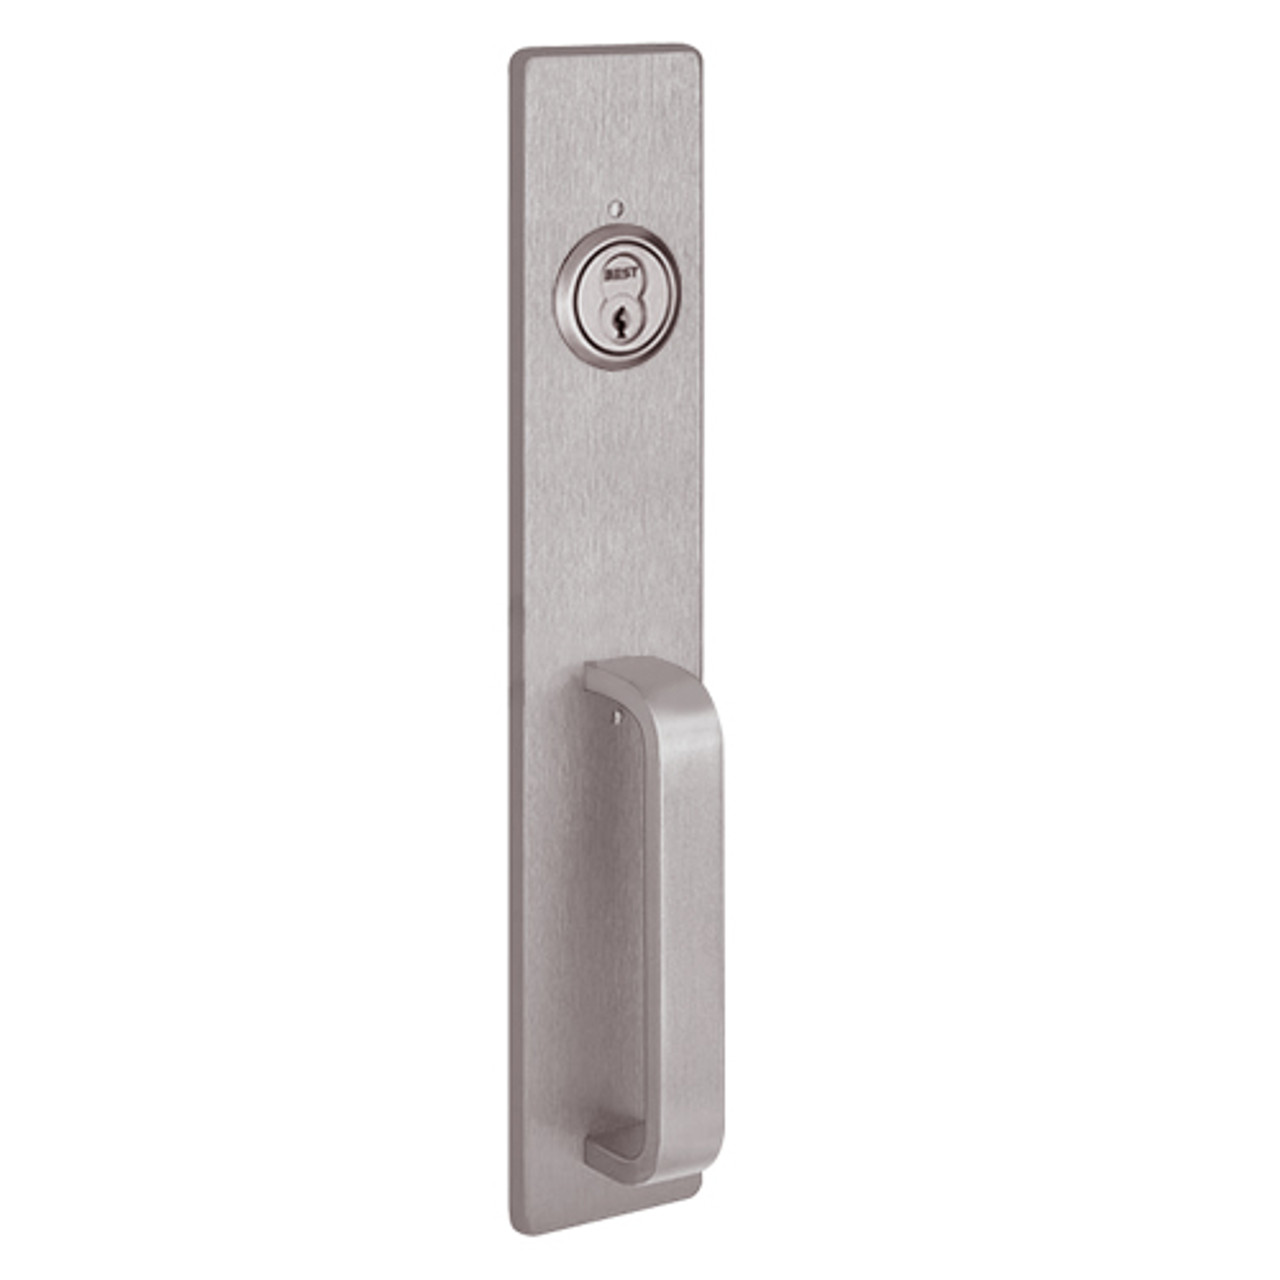 R1703A-630 PHI Key Retracts Latchbolt Retrofit Trim with A Design Pull for Apex and Olympian Series Exit Device in Satin Stainless Steel Finish